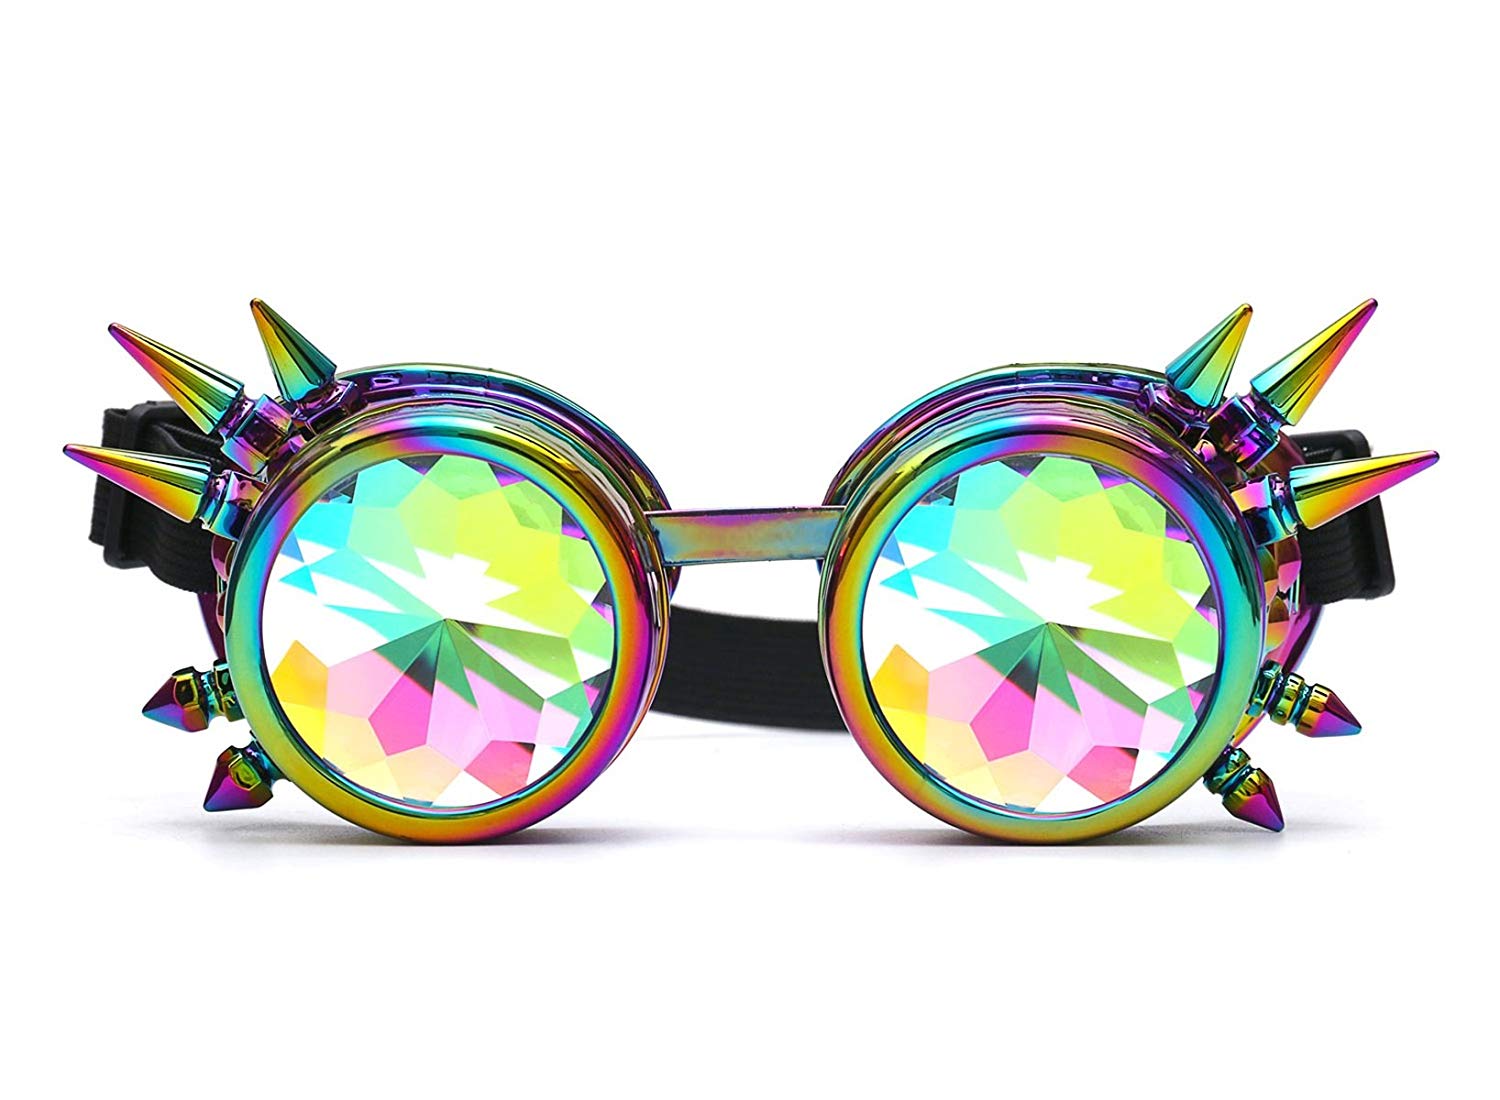 Kaleidoscope Steampunk Rave Glasses Goggles with Rainbow Crystal Glass Lens